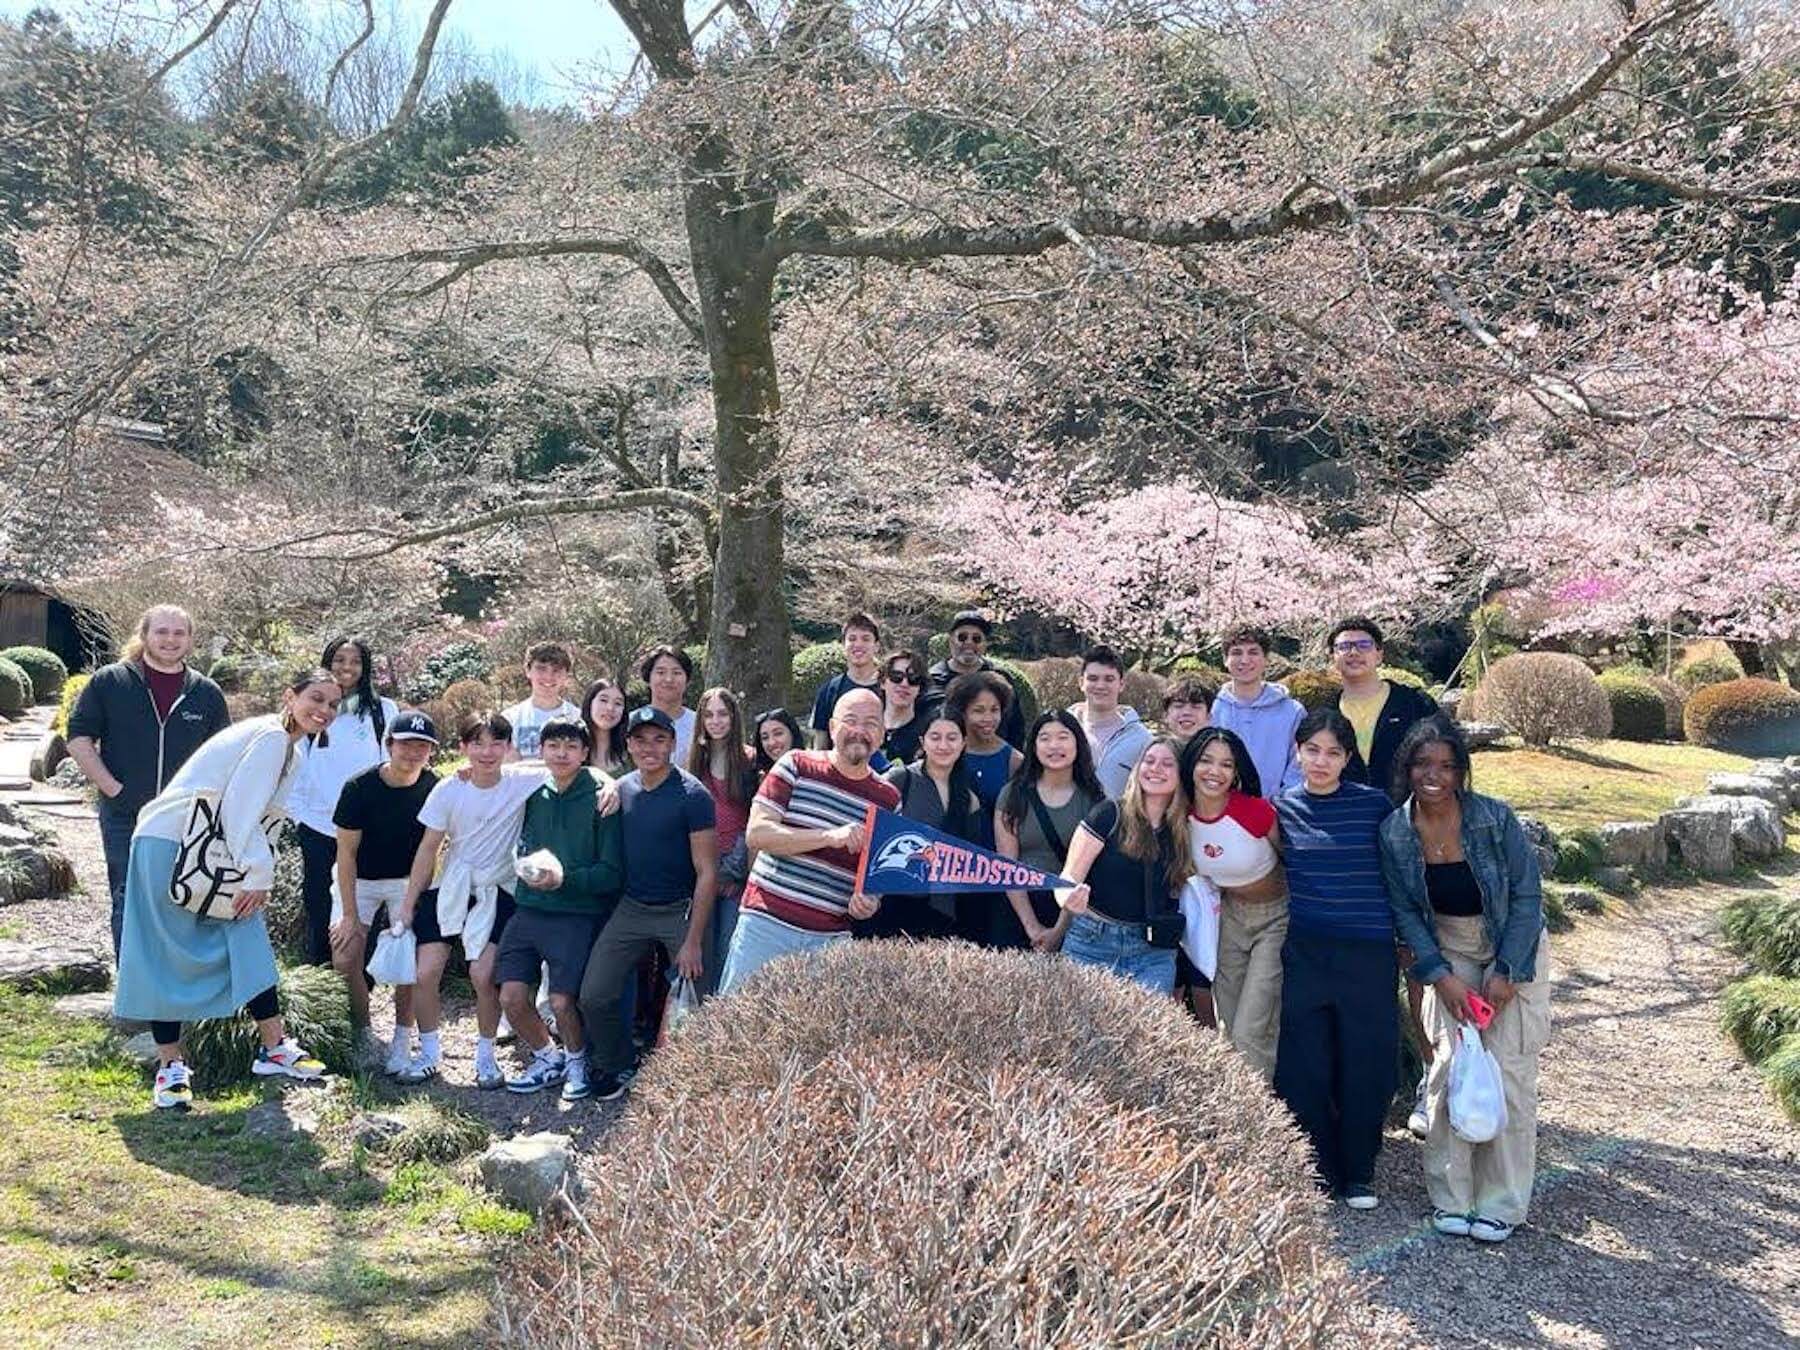 Group of Ethical Culture Fieldston School Upper School students standing under cherry blossoms during trip abroad to Japan